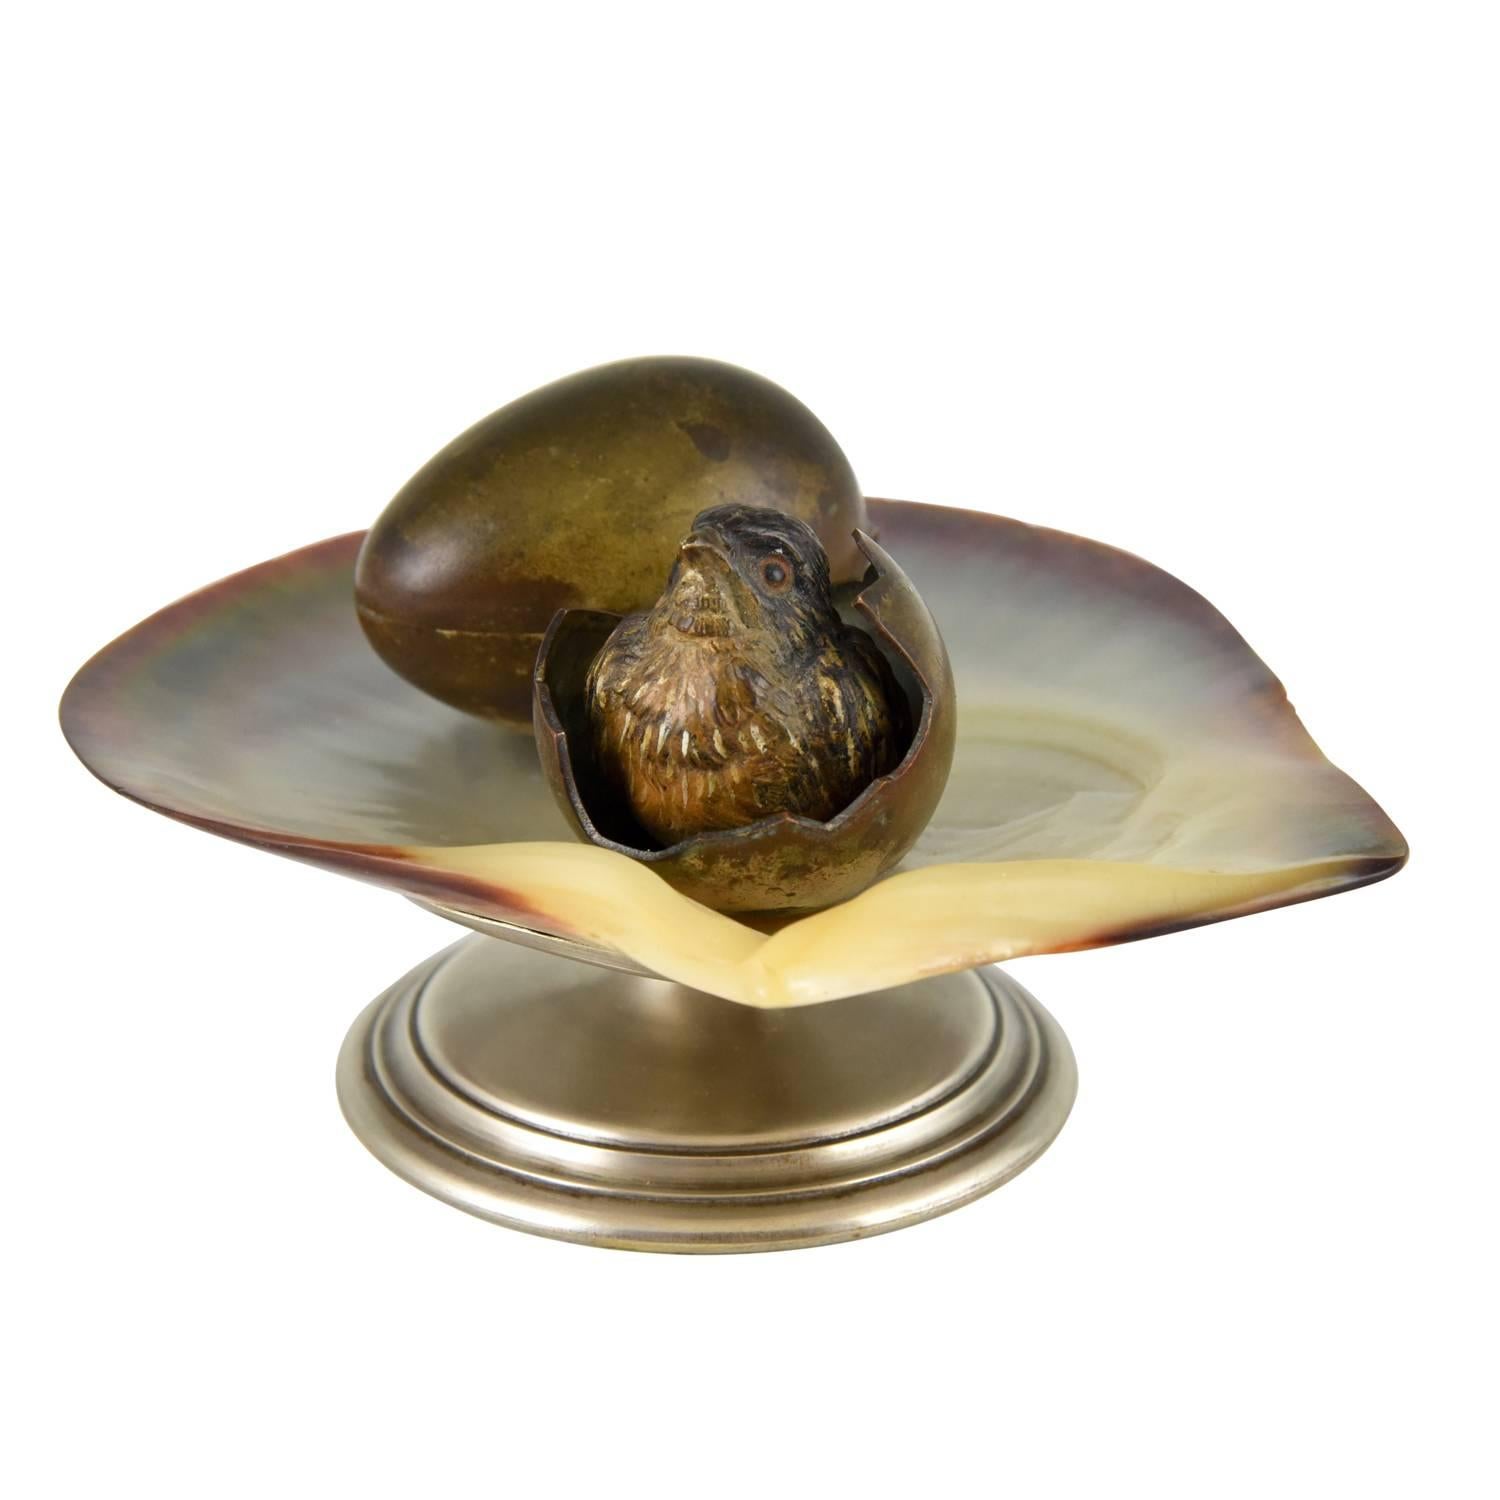 Antique Vienna Bronze Inkwell Tray with Bird and Egg Shell on Natural Shell 1900